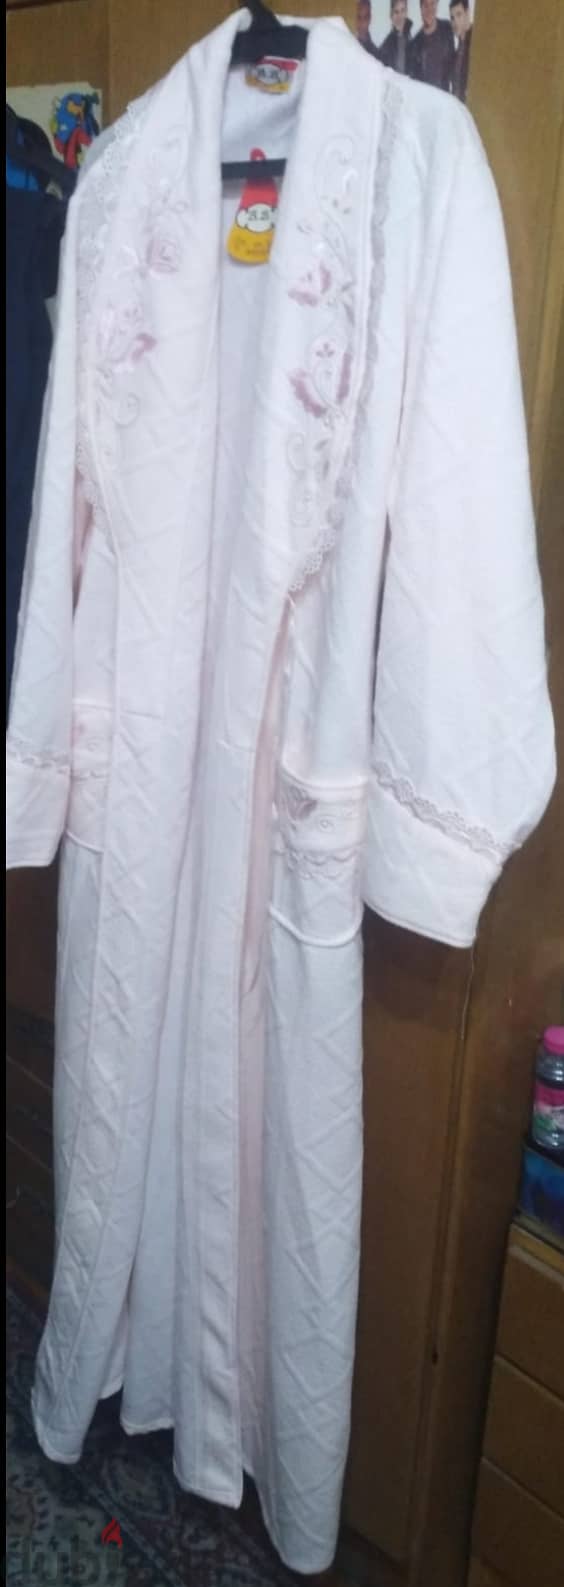 Pijama and Robe for women 1